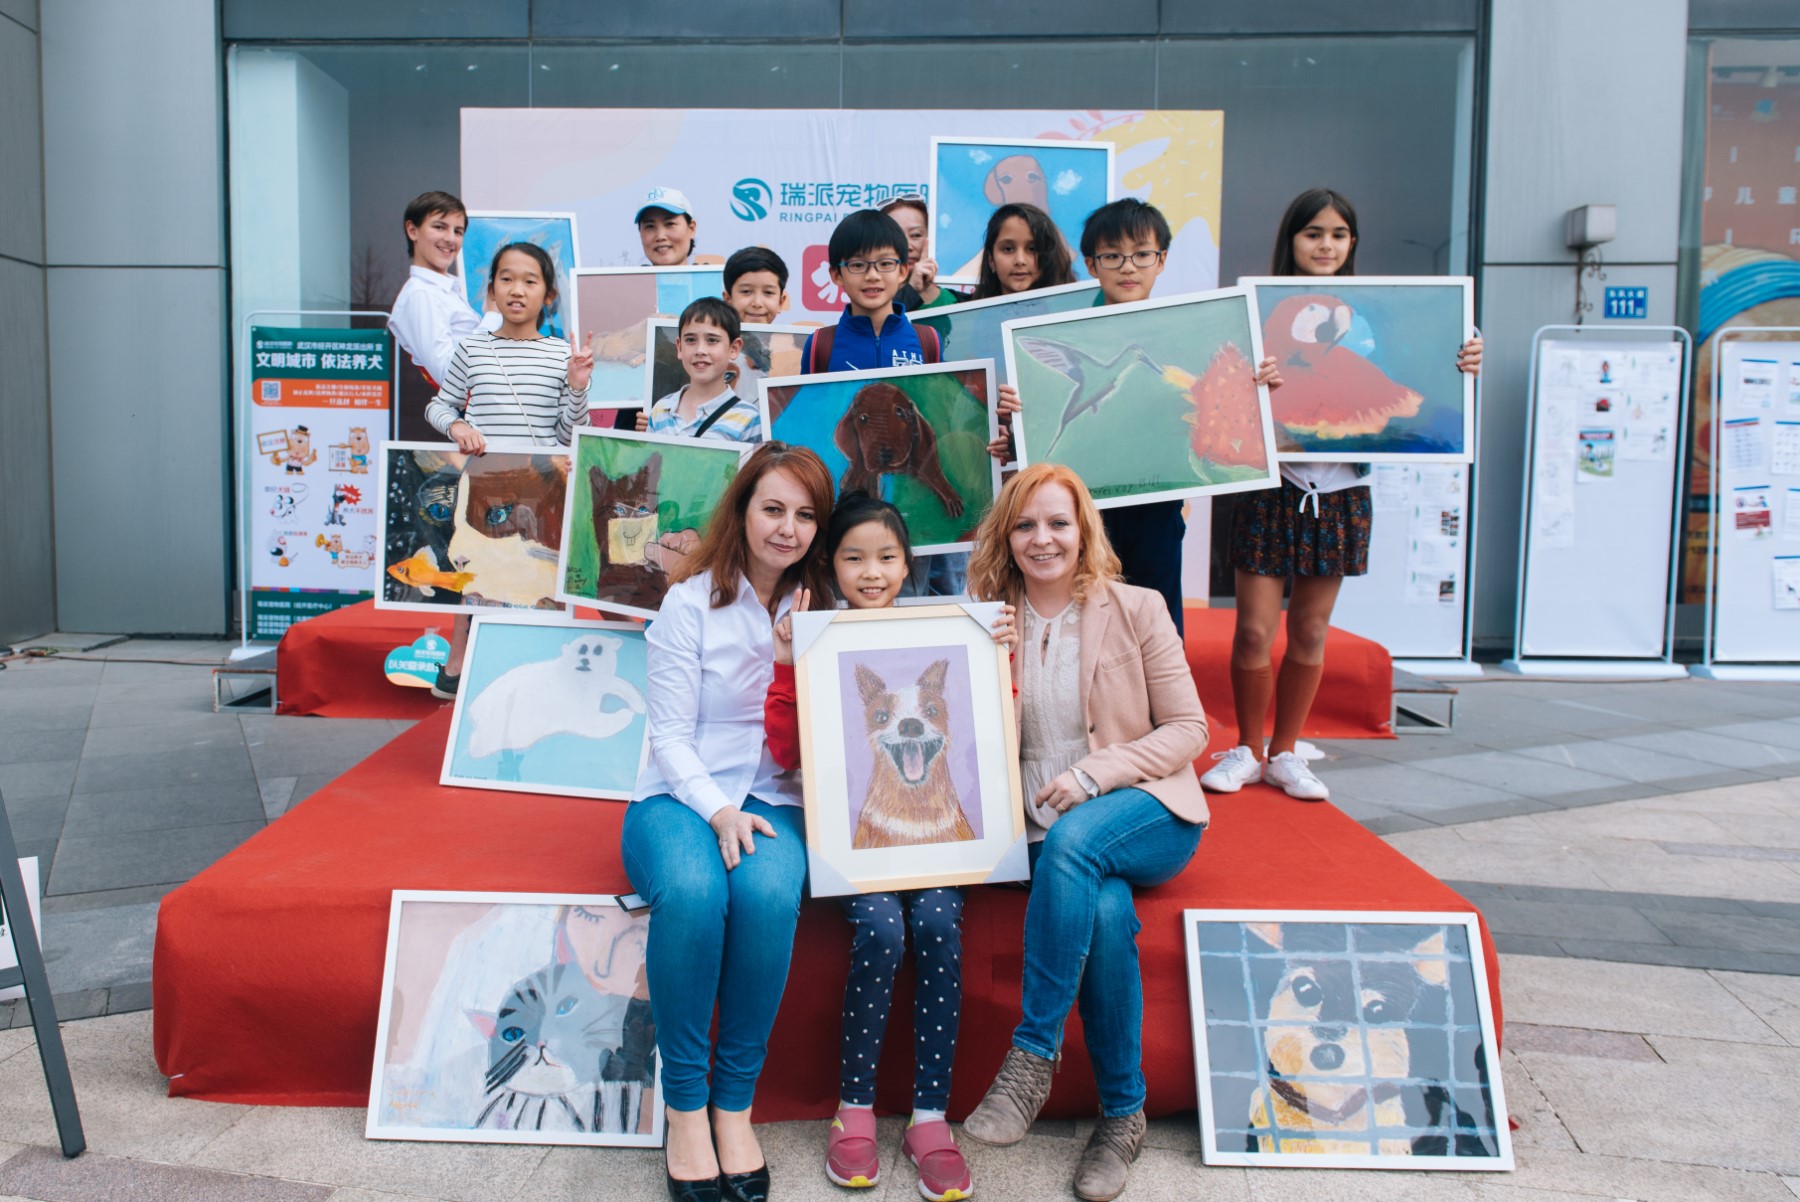 Children with their paintings for the art auction